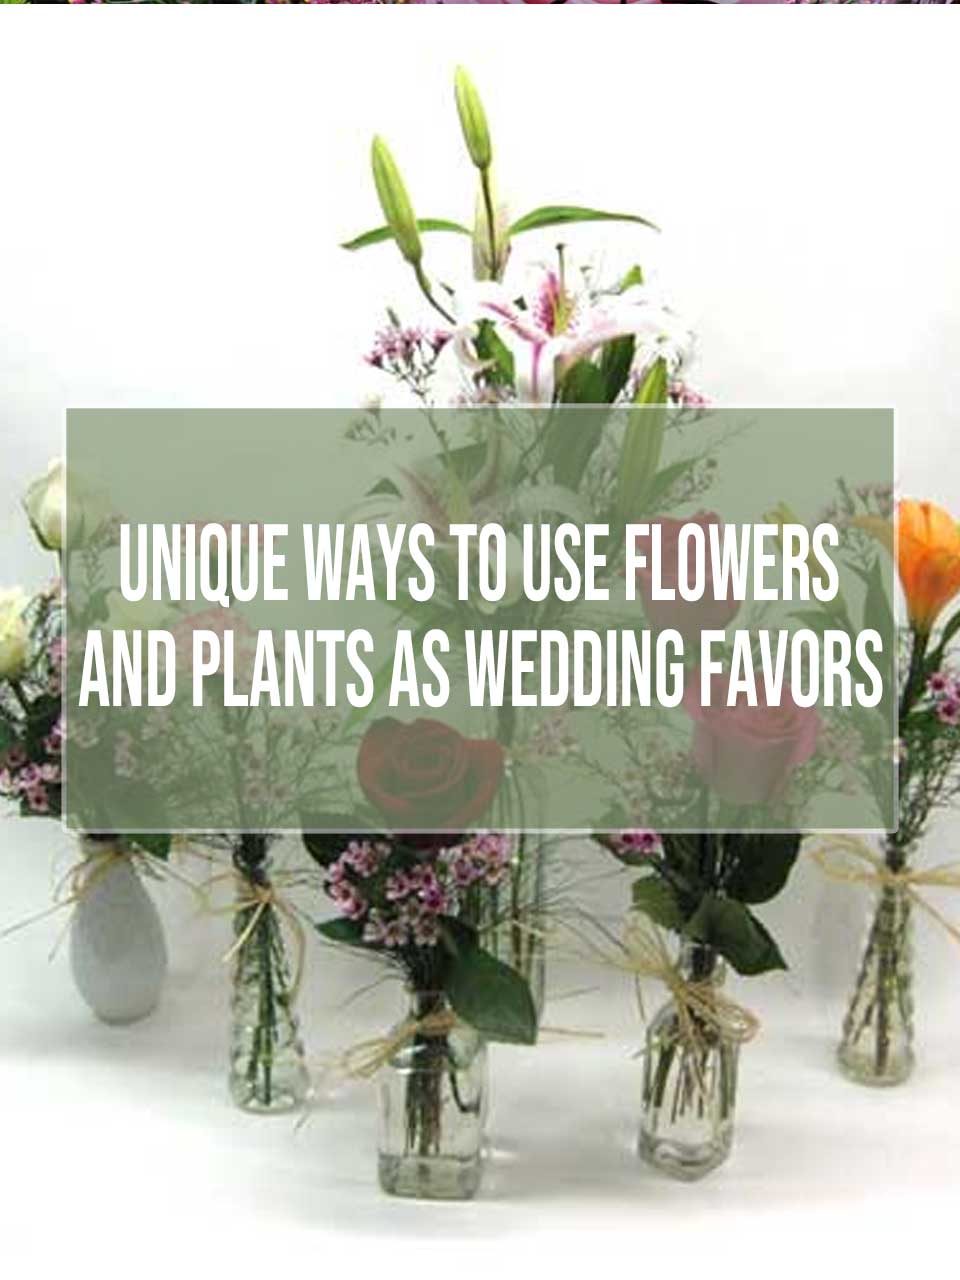 Unique ways to use flowers and plants as wedding favors